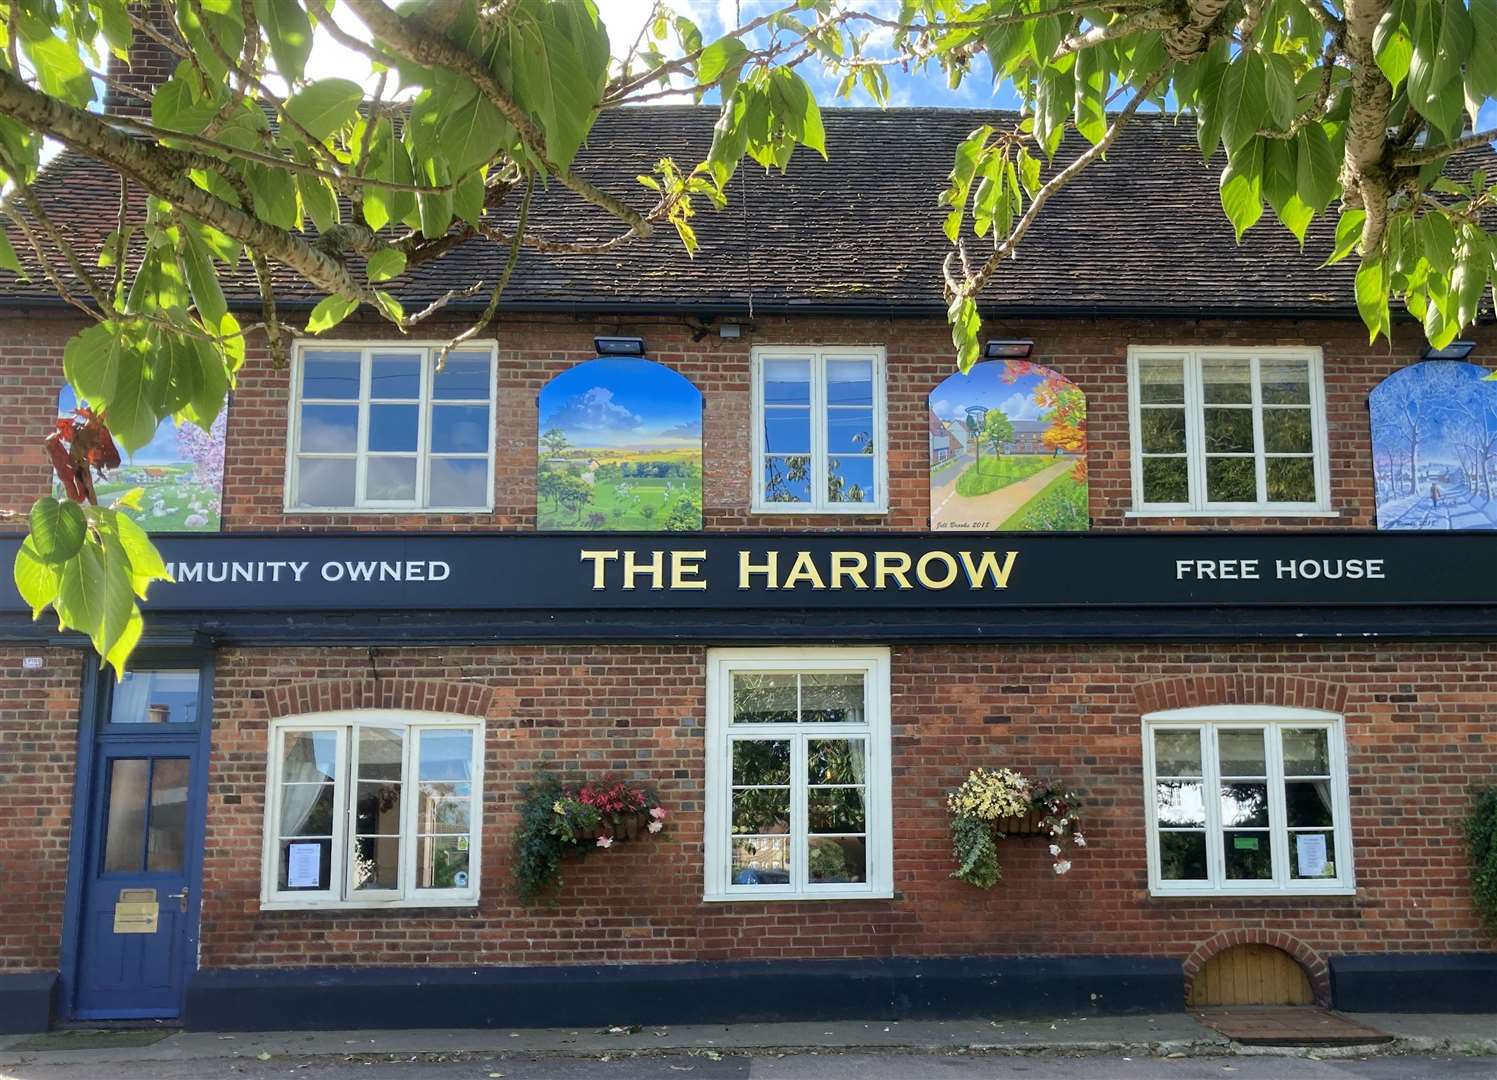 Members of Stockbury’s community-owned pub, The Harrow, have shared concern over the closure. Photo: Anne Southern